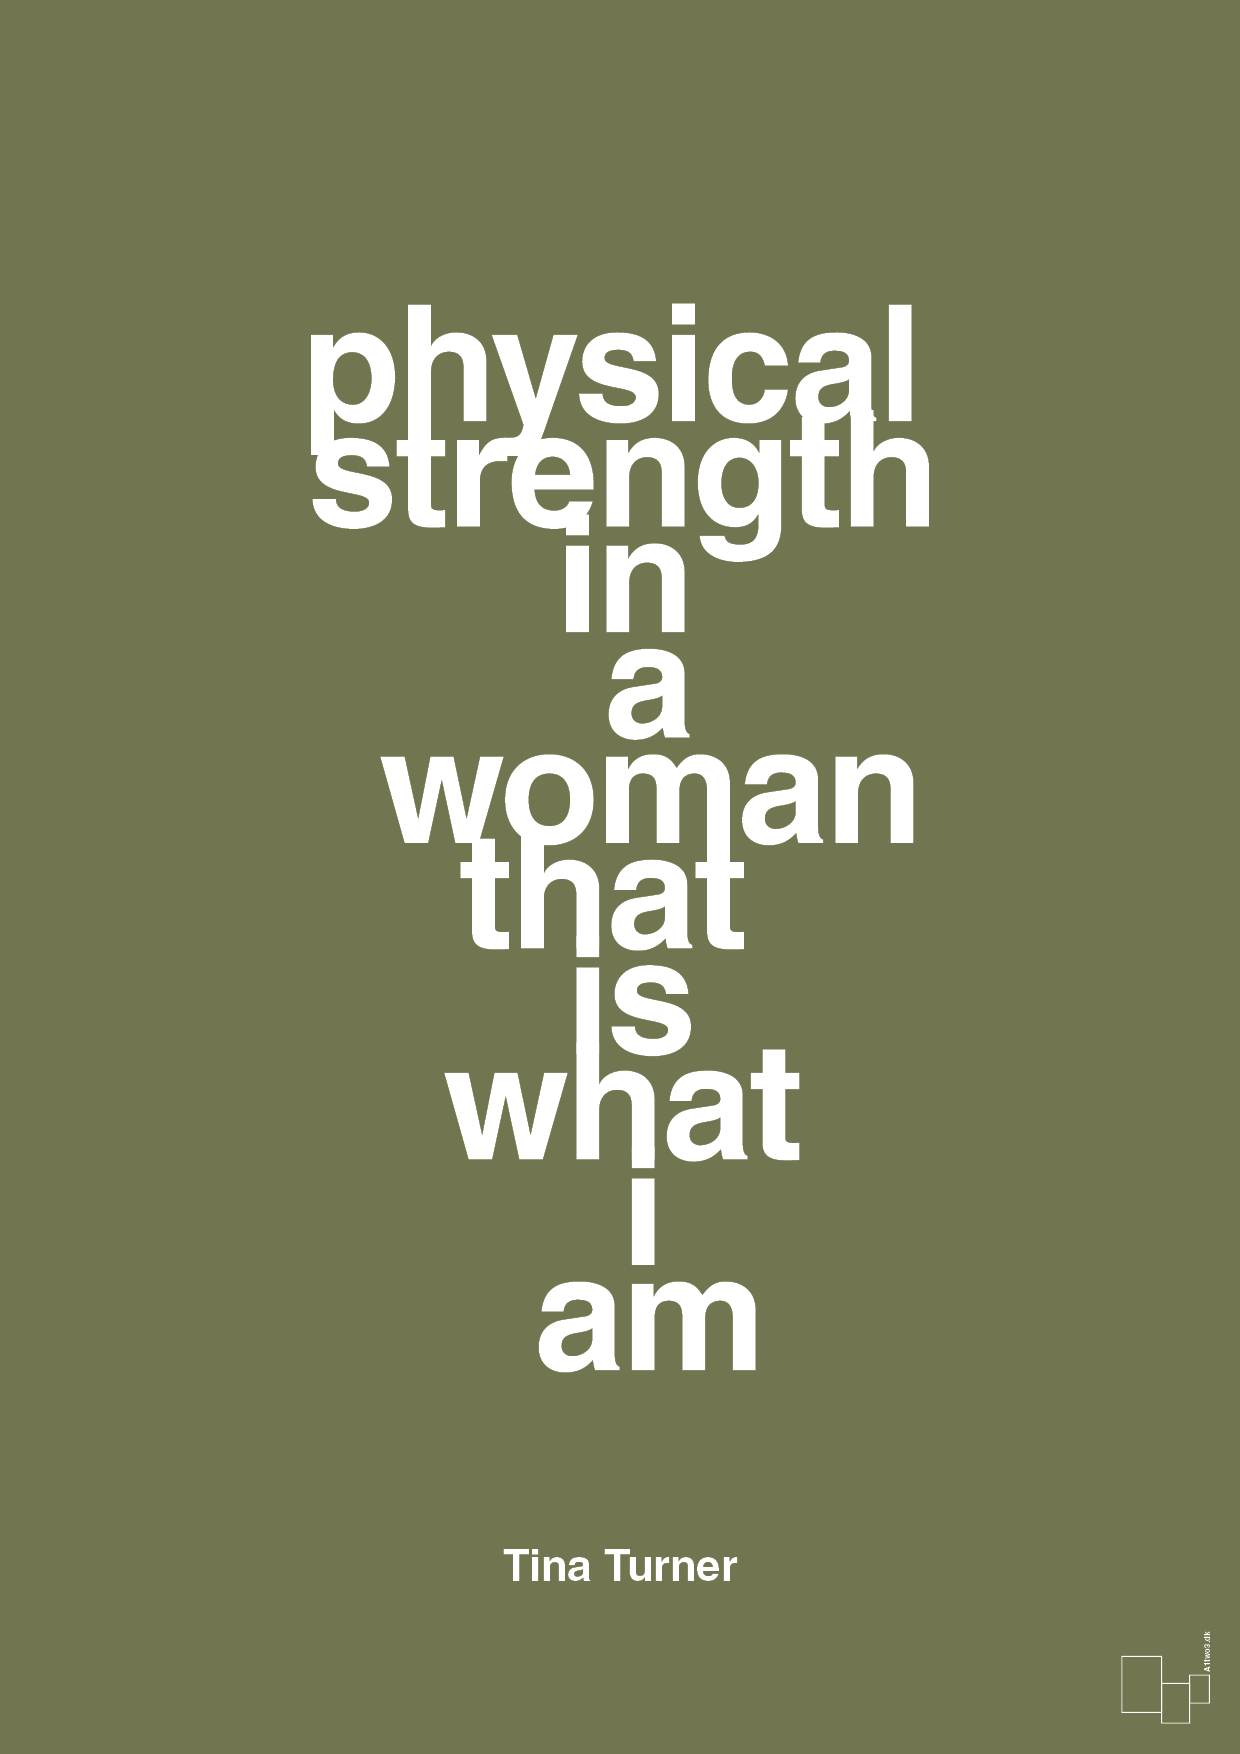 physical strength in a woman that’s what I am - Plakat med Citater i Secret Meadow